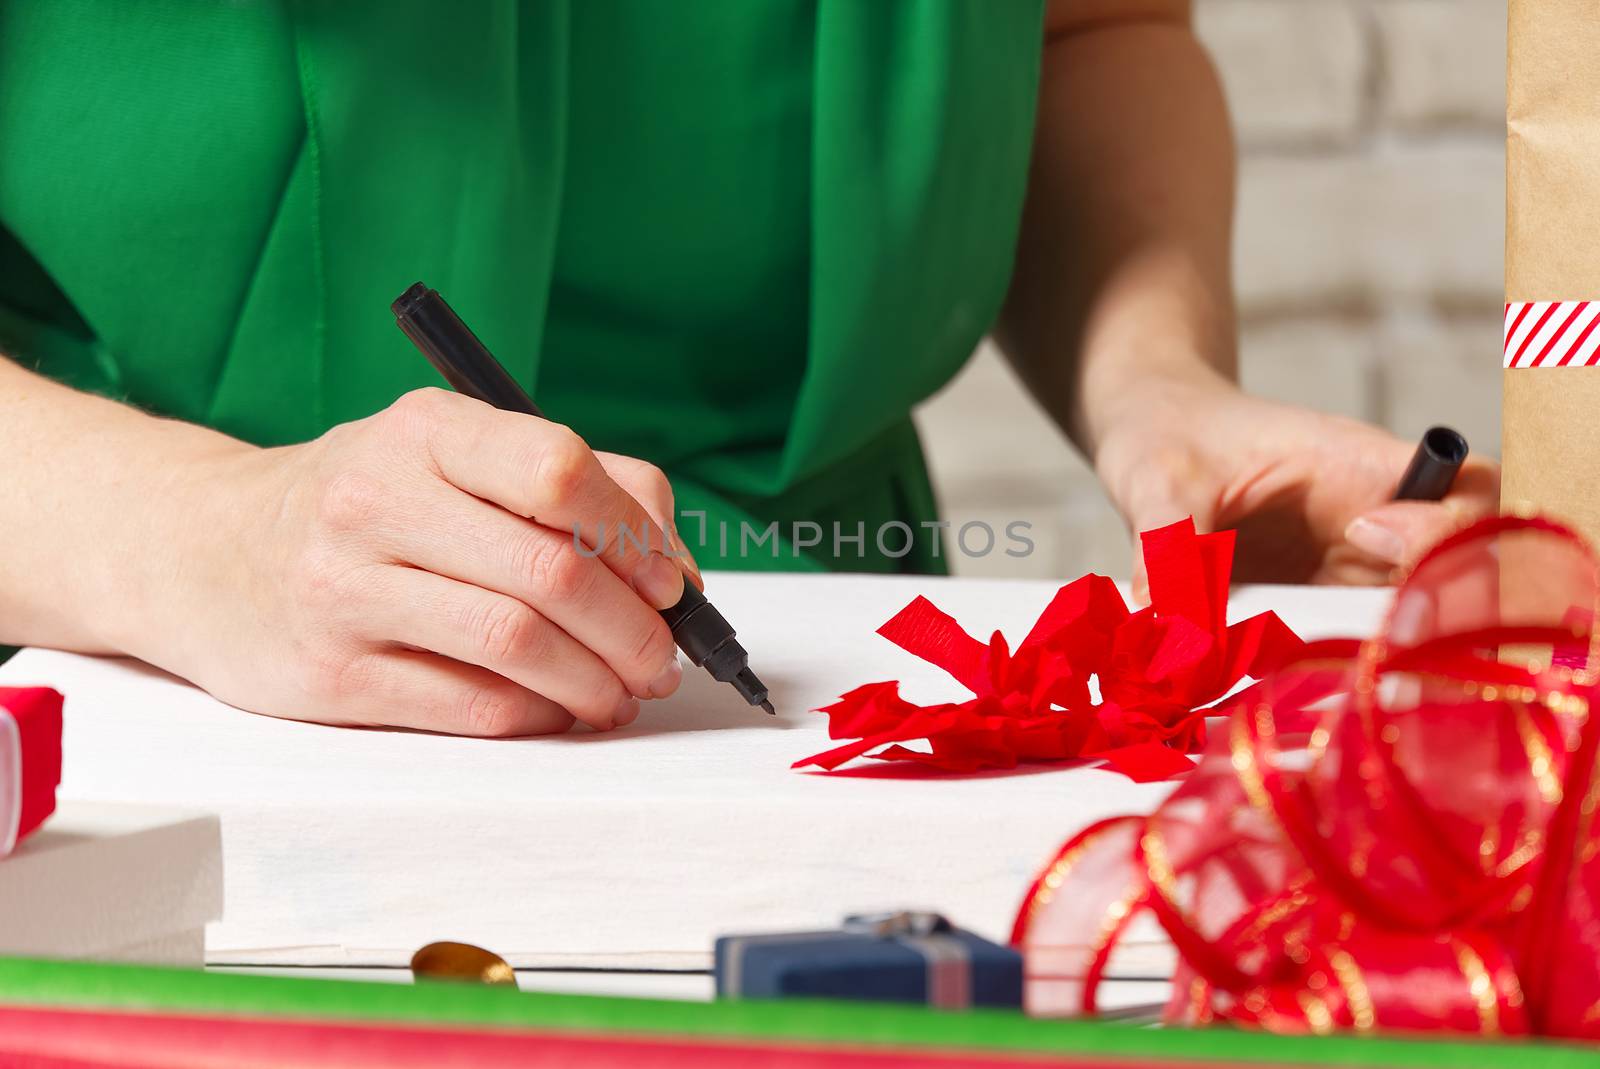 woman signs christmas gifts with a black pen. christmas gifts packing service concept